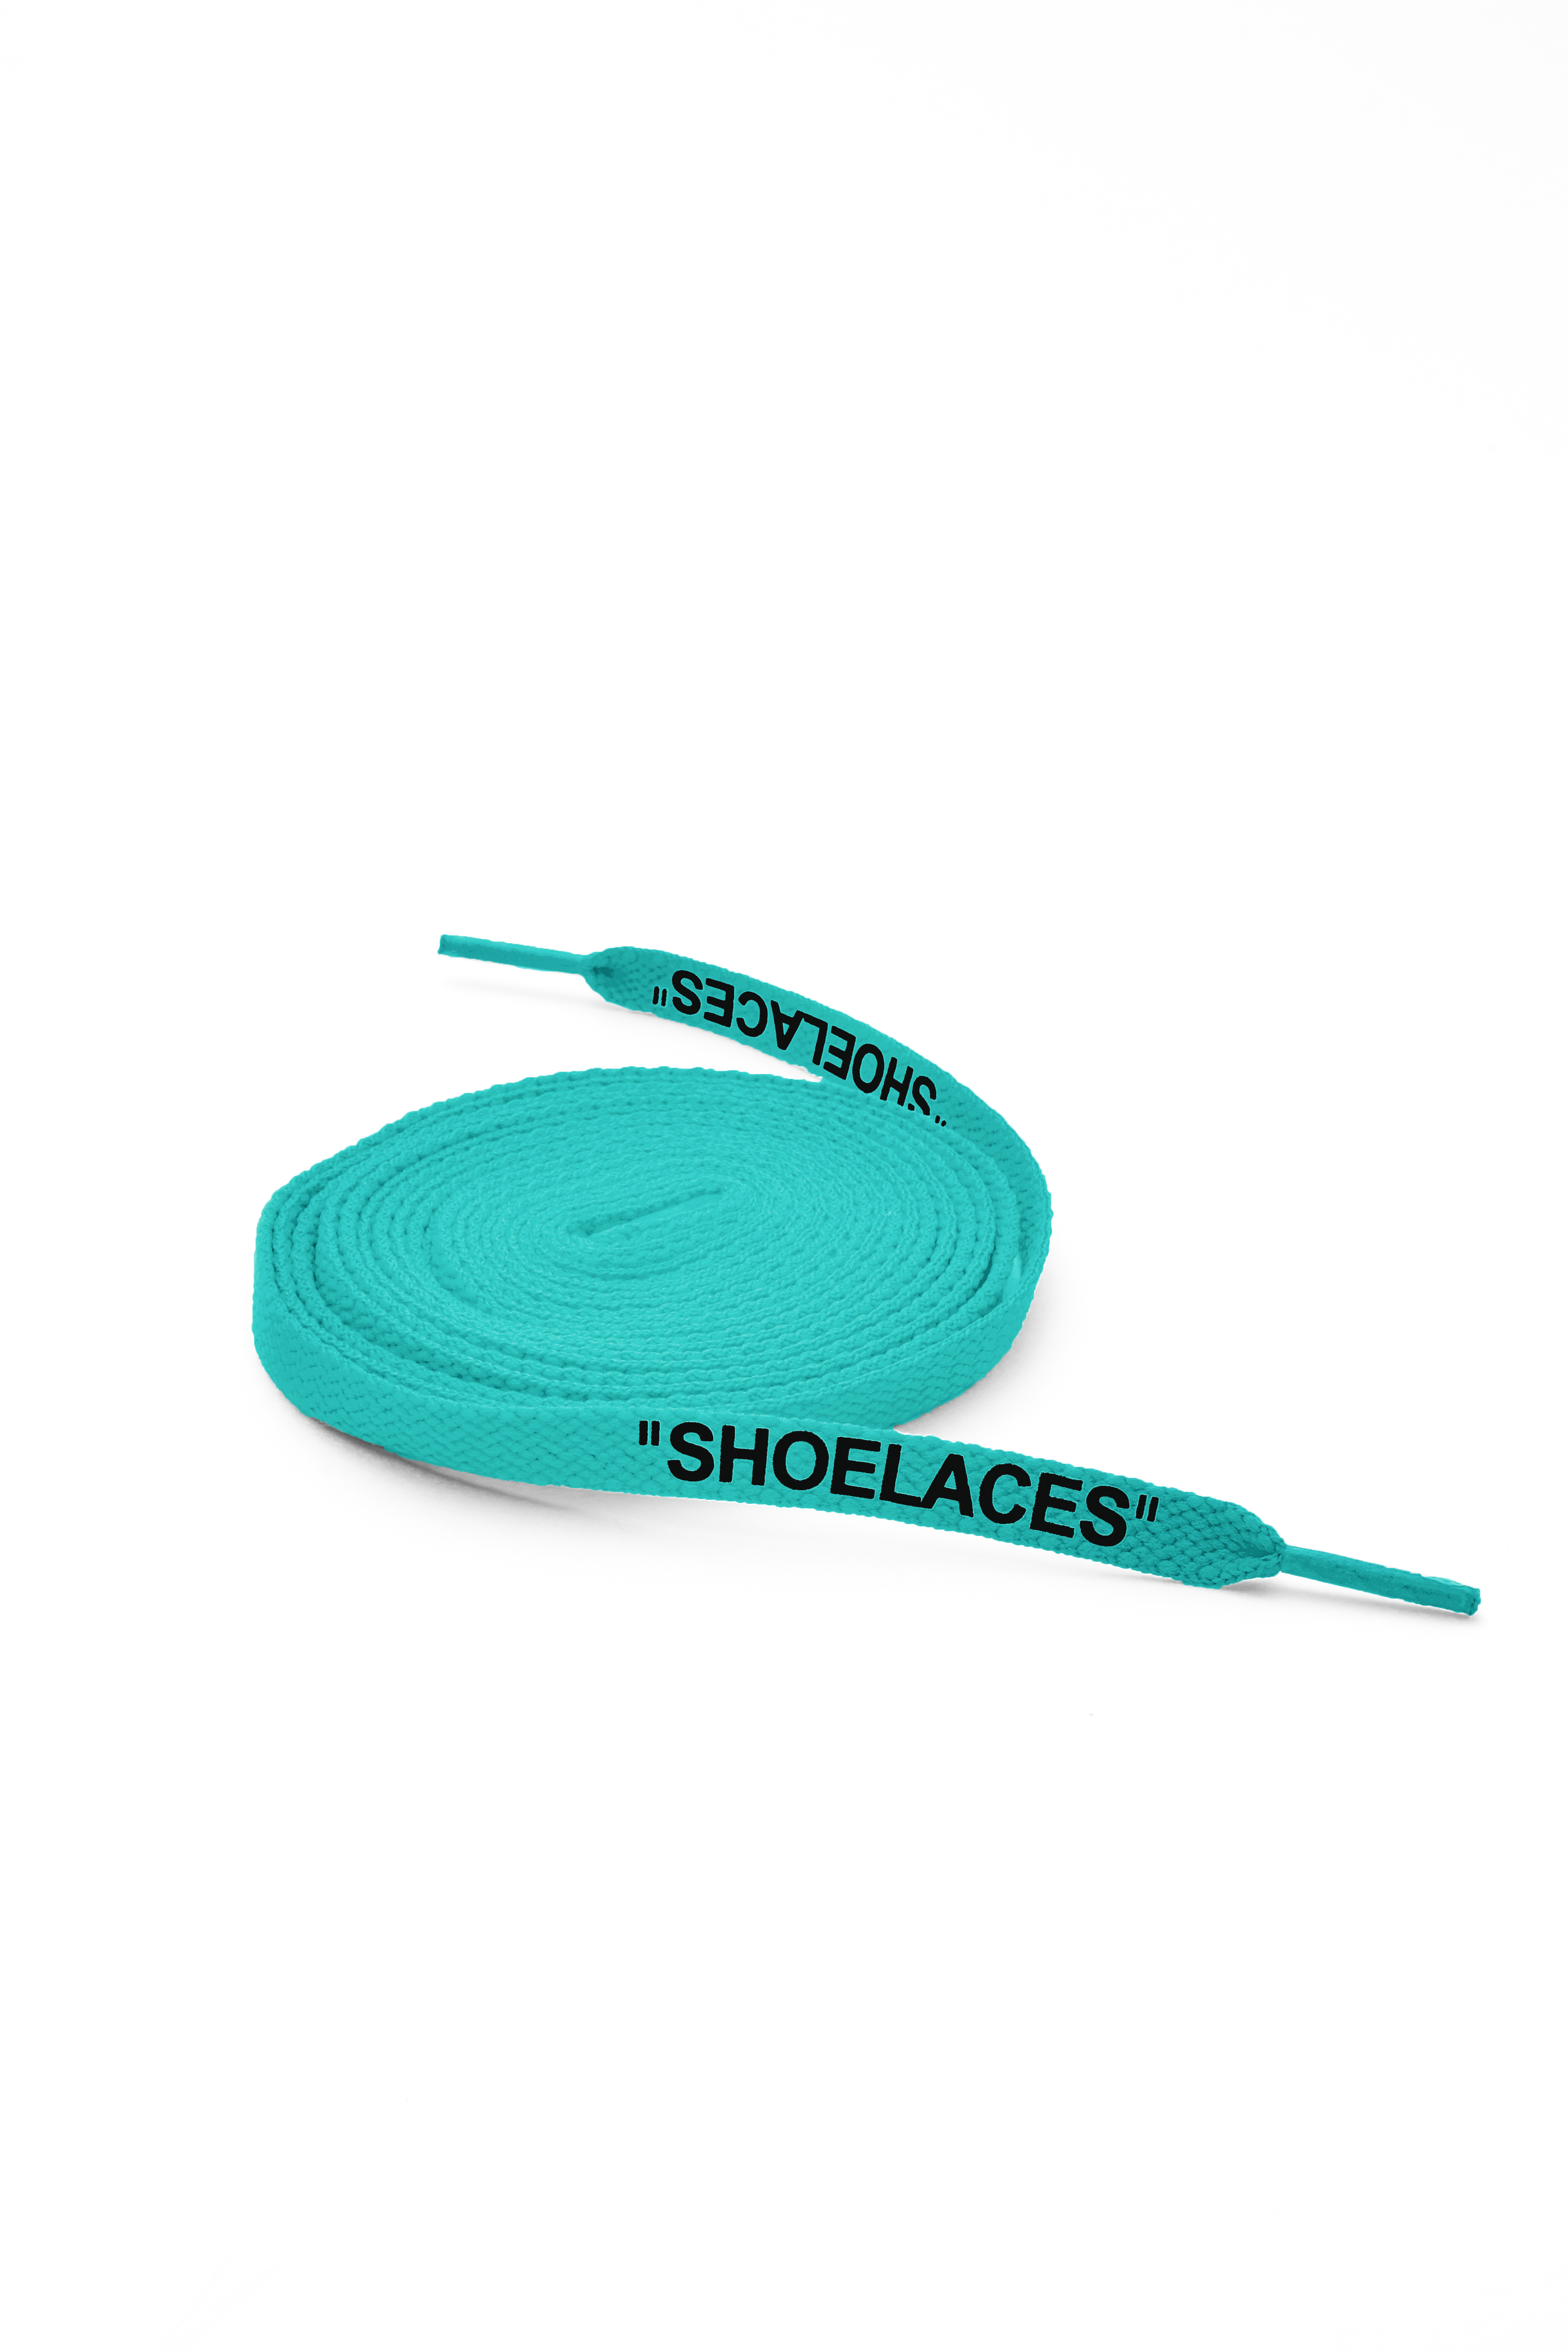 teal off white laces